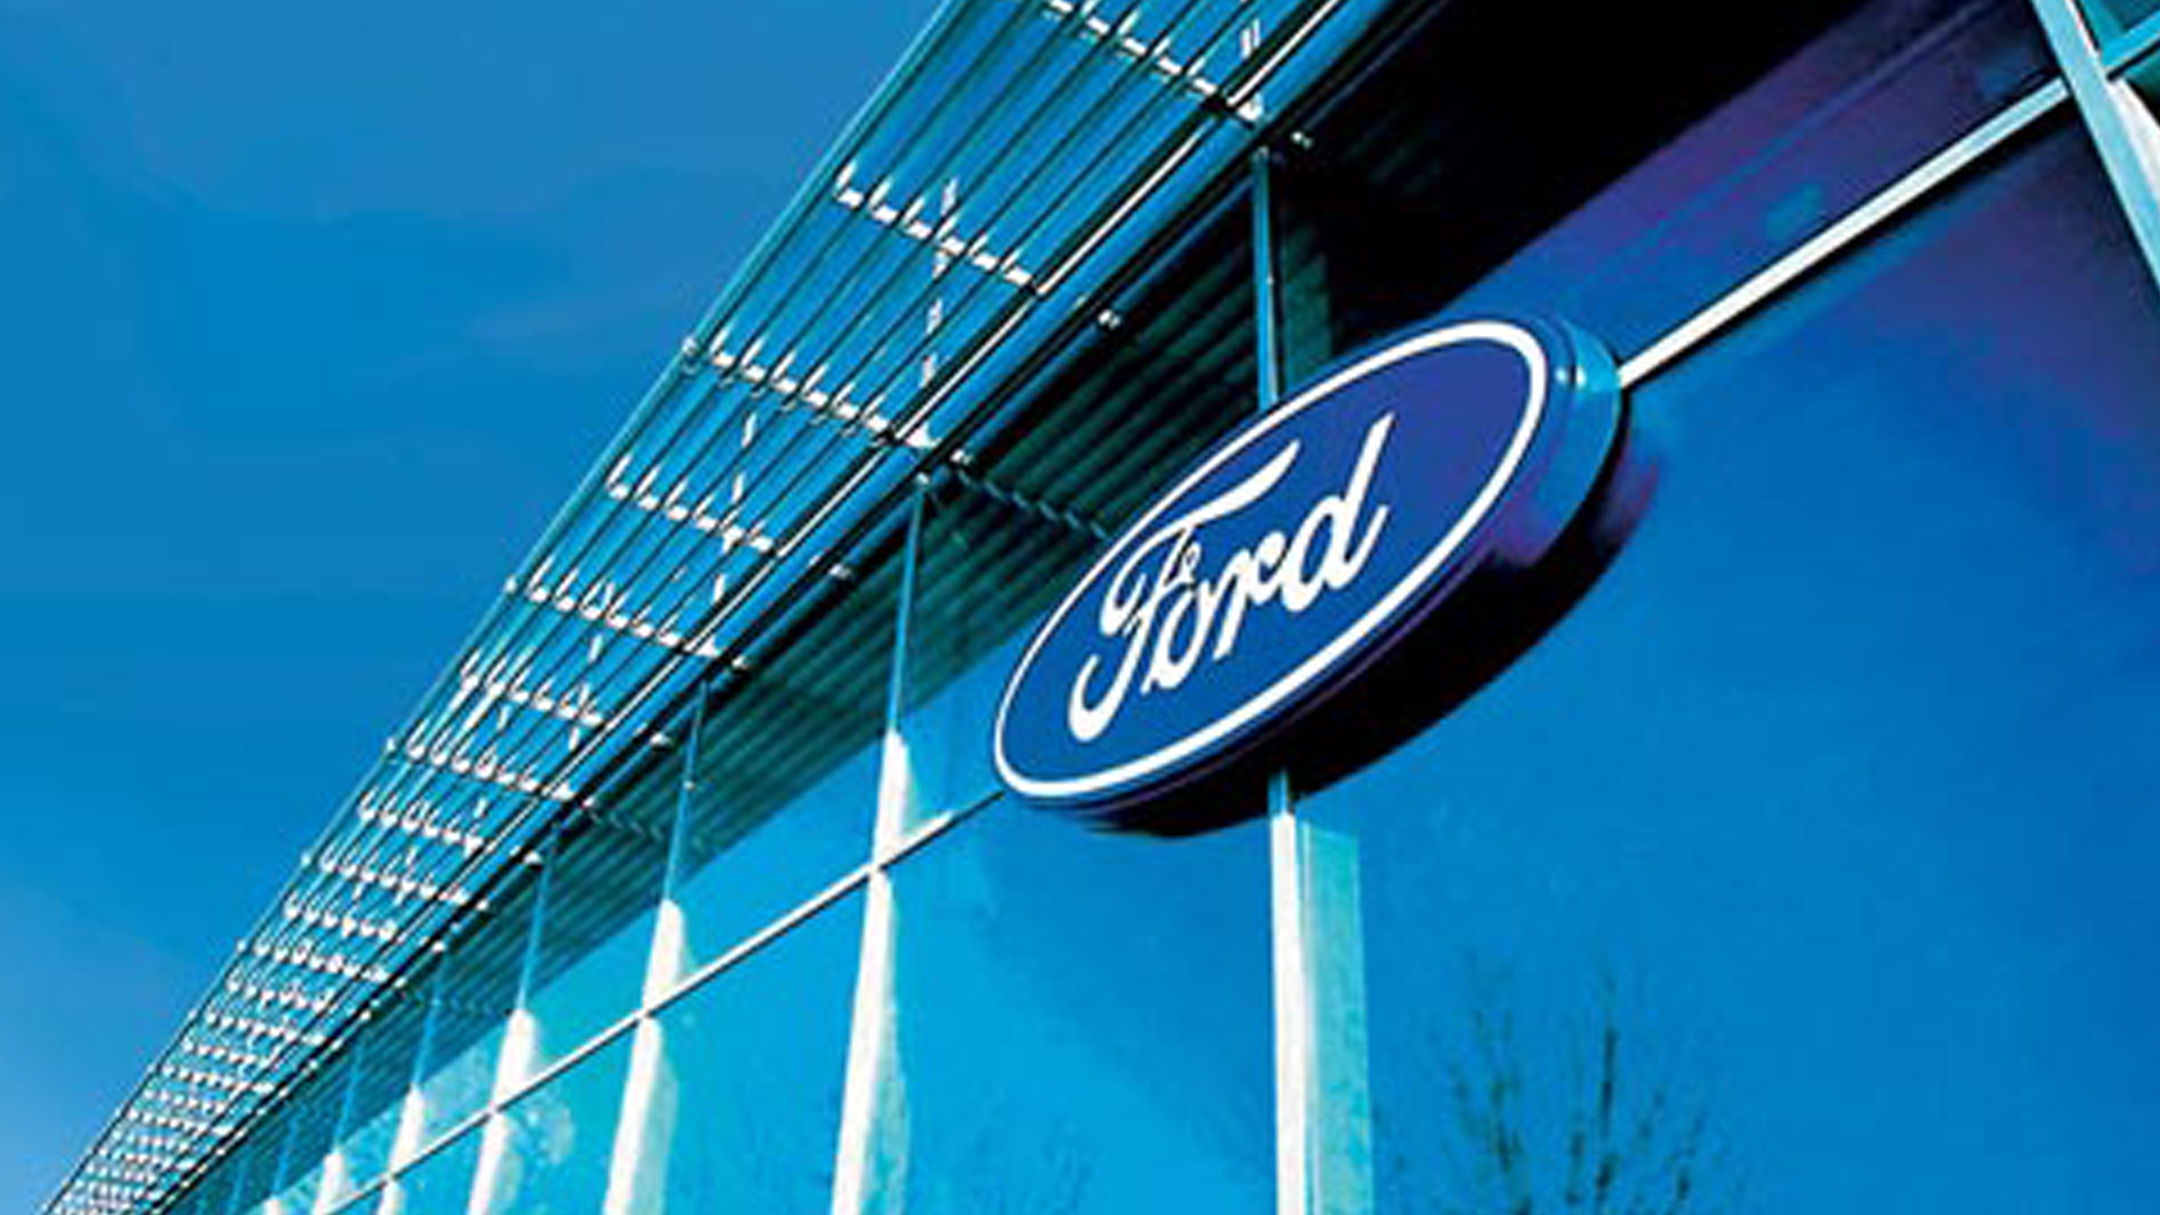 Ford logo on glass wall